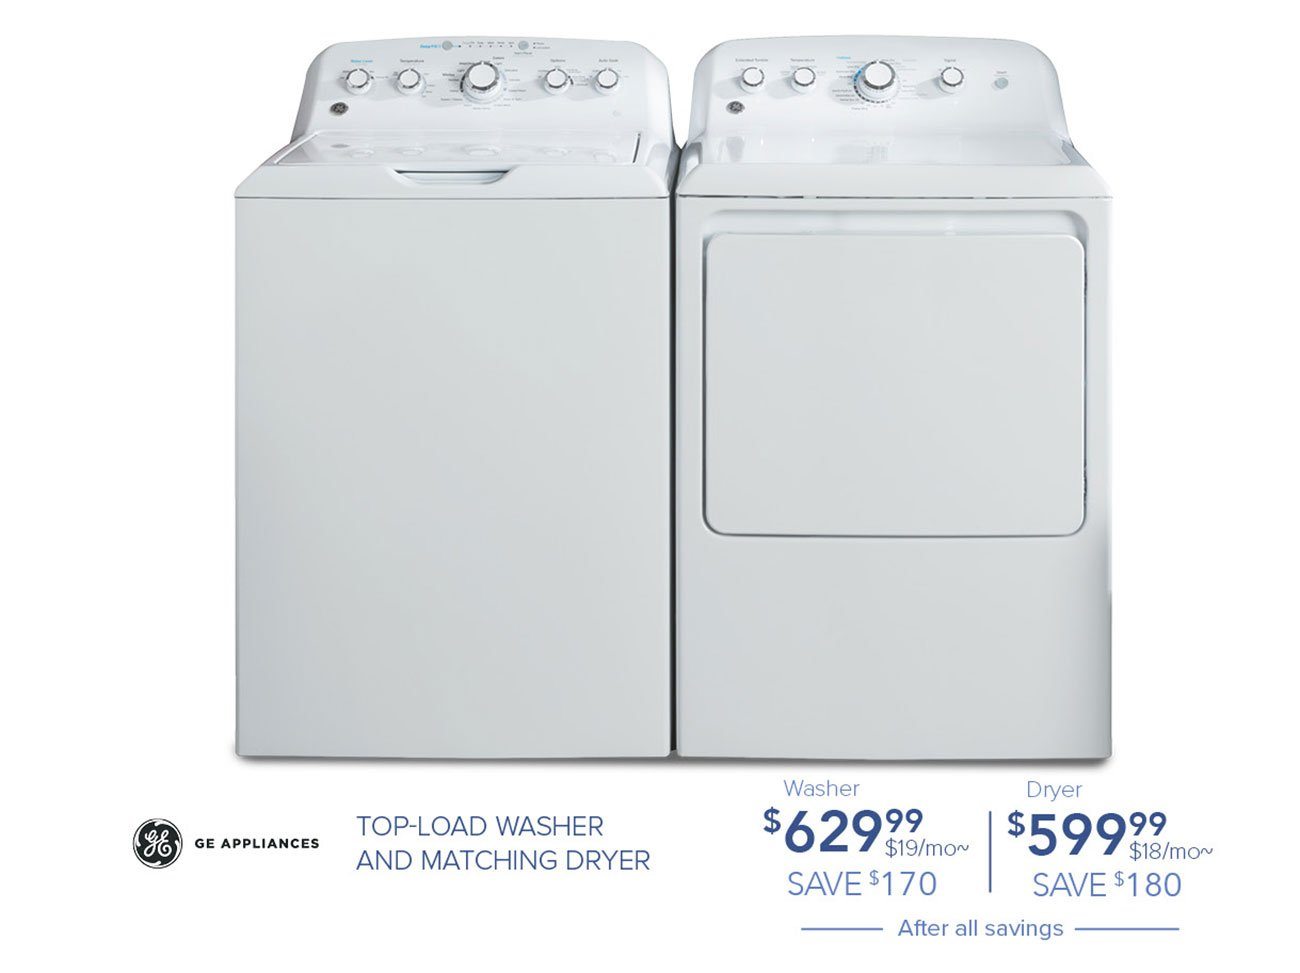 GE-Top-load-washer-dryer